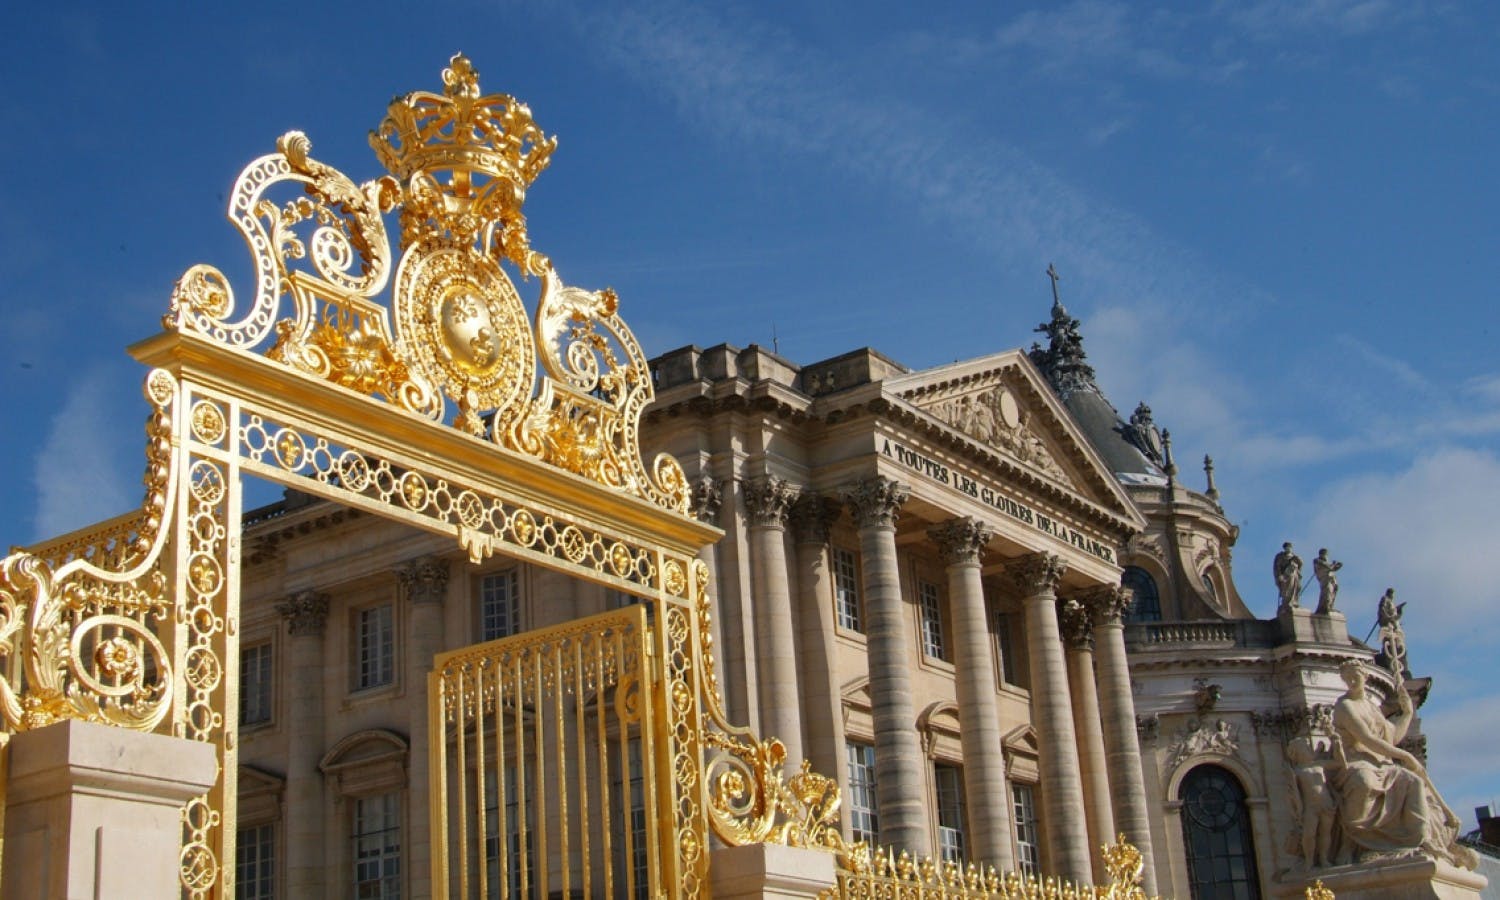 Visit of Versailles with Audioguide - Full Day